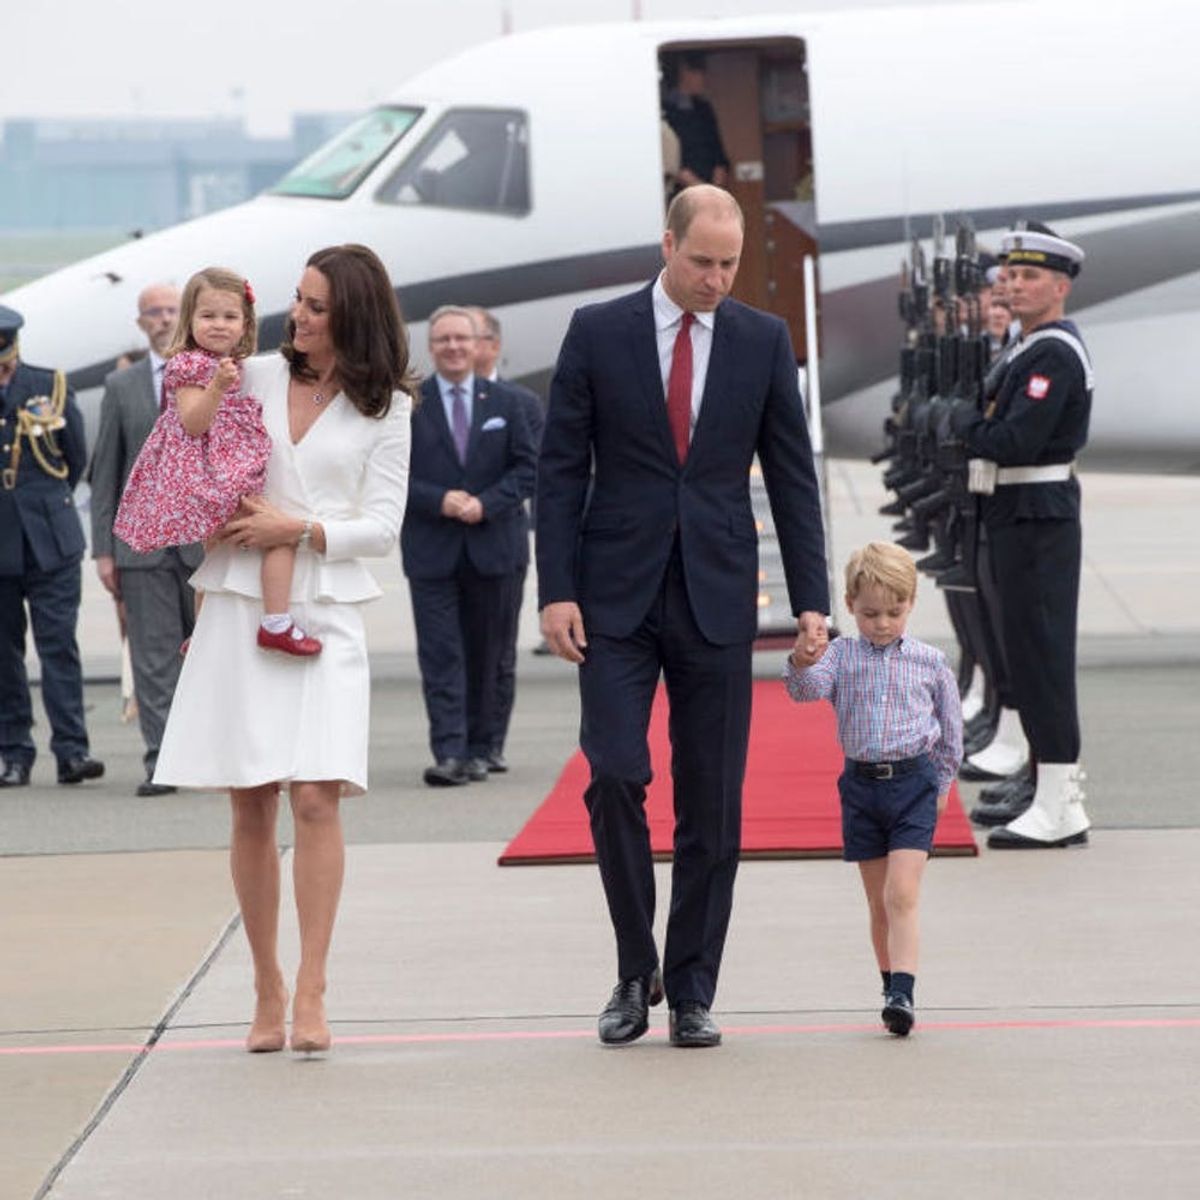 These Photos of Prince George and Princess Charlotte on Tour Are Heart-Meltingly Adorable